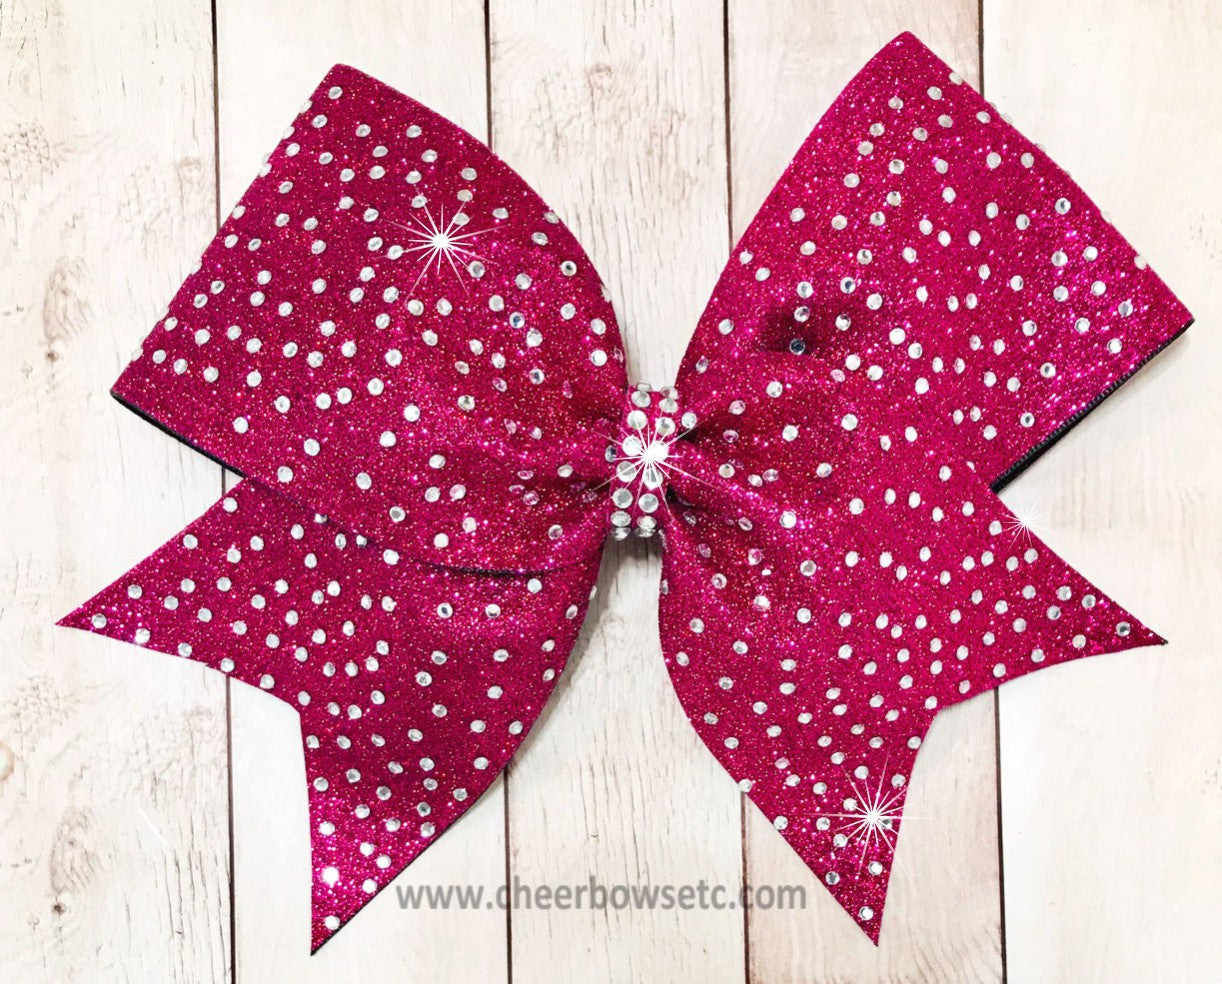 rasberry hot pink glitter bow with stones 